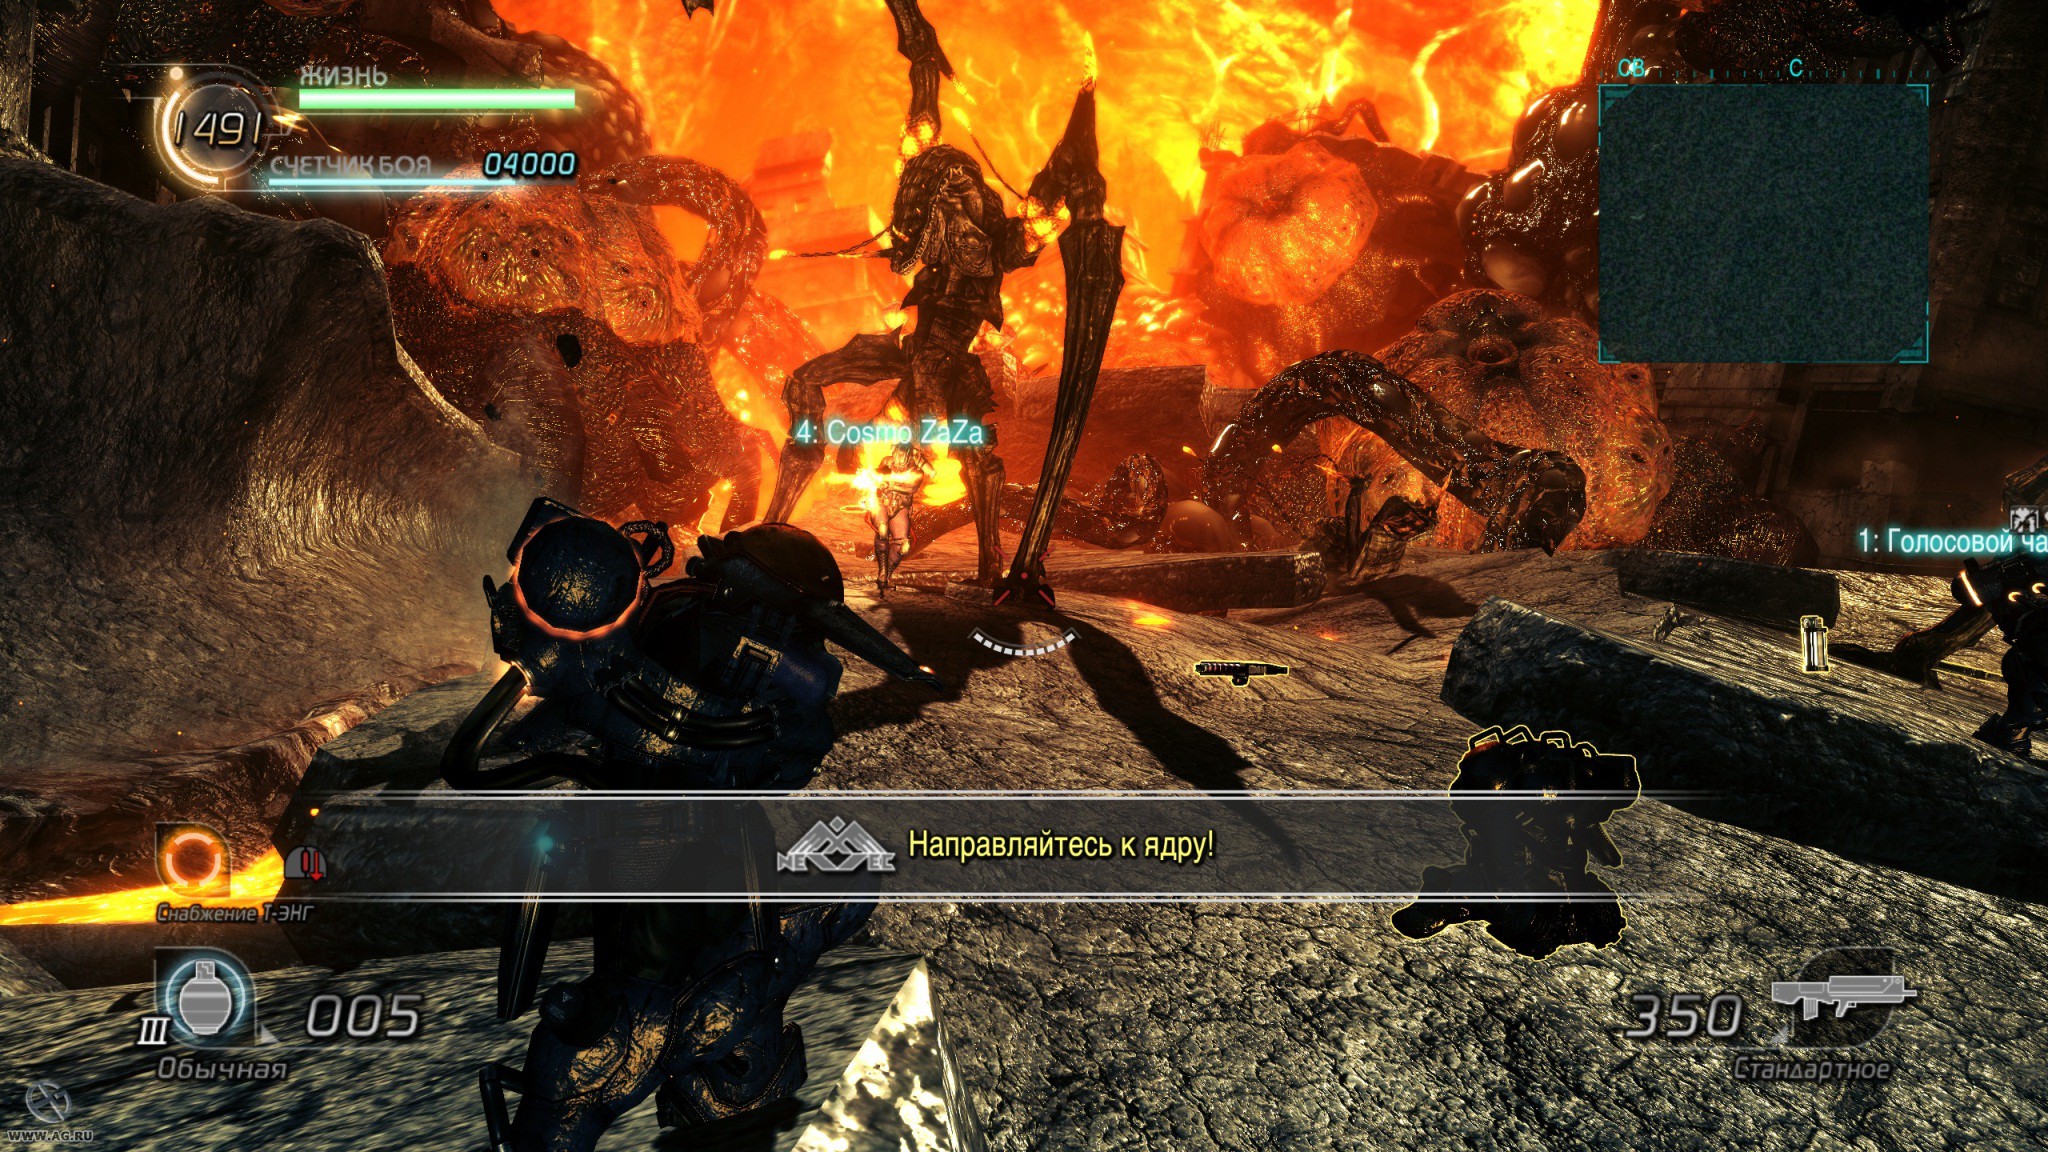 Lost the game two. Lost Planet 2 (2010). Игра лост планет. Lost Planet 2 мультиплеер. Lost Planet 2 и 3.